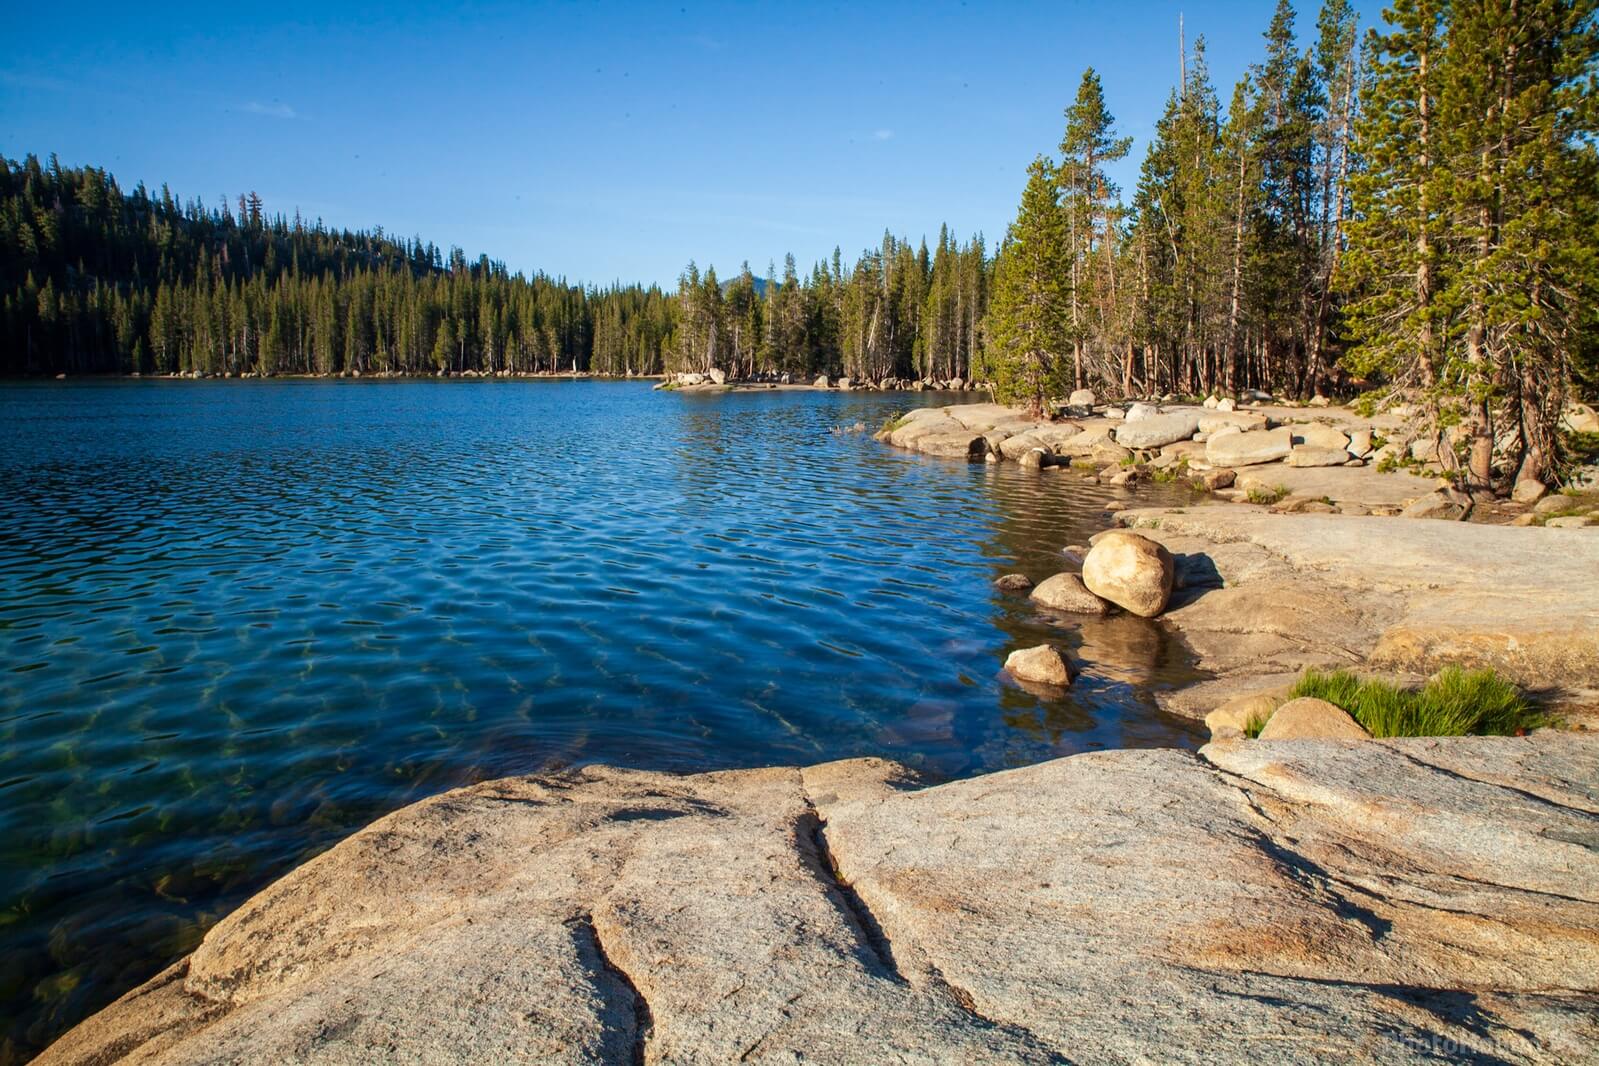 Image of Tenaya Lake from the West End by Greg Valle